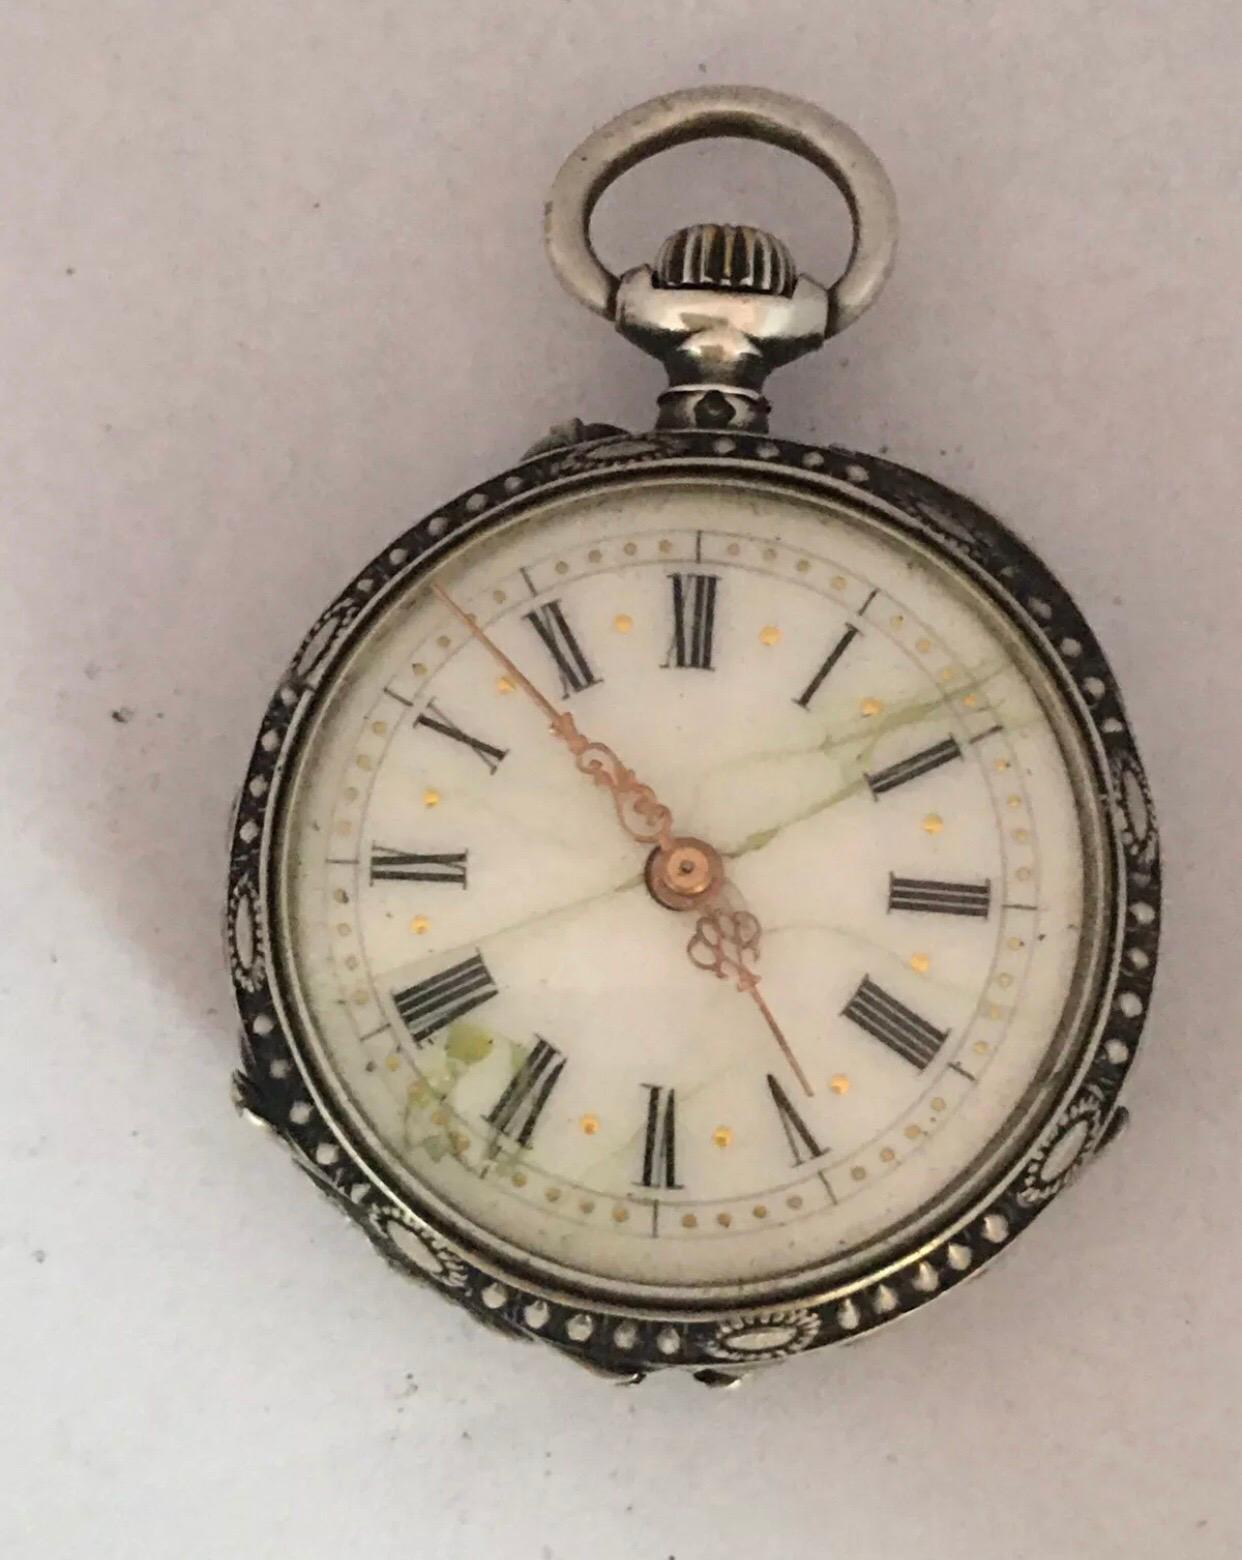 This beautiful 30mm diameter (excluding the crown)small ladies fob / pocket watch is Not working. The balance wheel is broken. Visible signs of ageing and wear with cracks on the white enamel dial as shown. Selling for spares or possible repair.